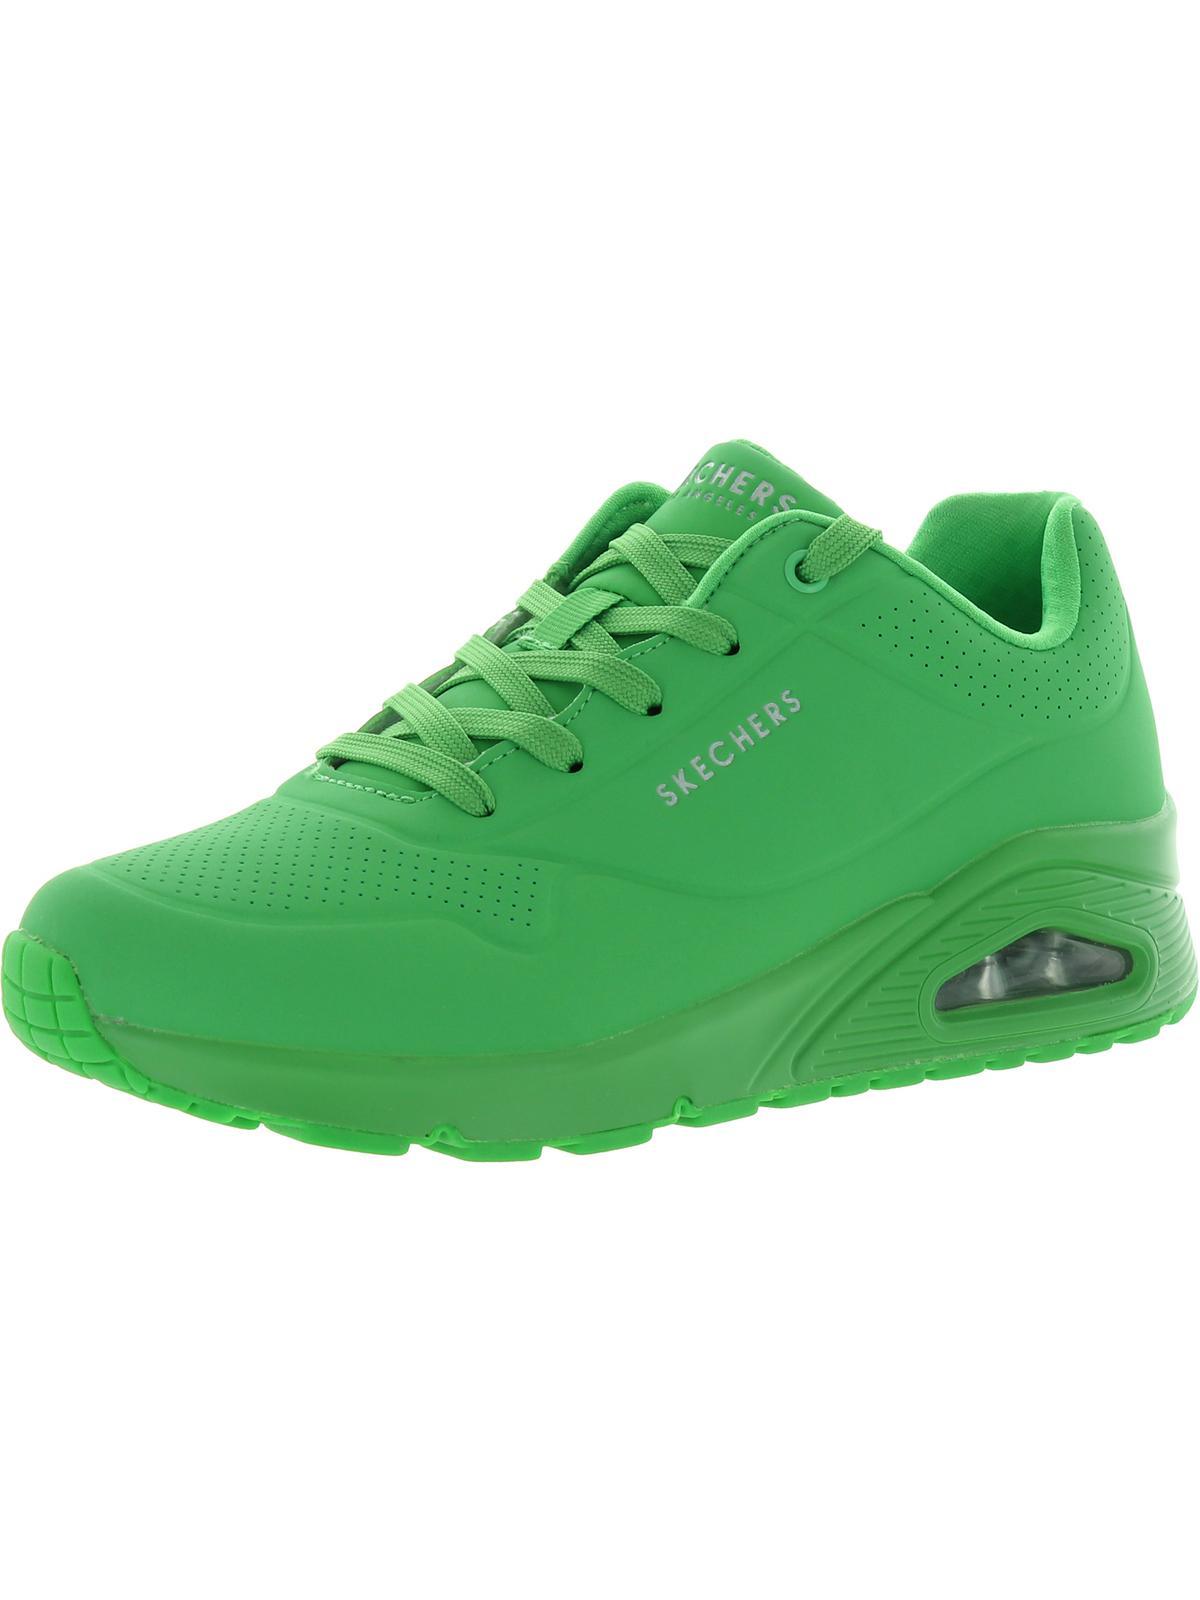 Skechers Uno-stand On Air Trainers Wedge Fashion Sneakers in Green | Lyst